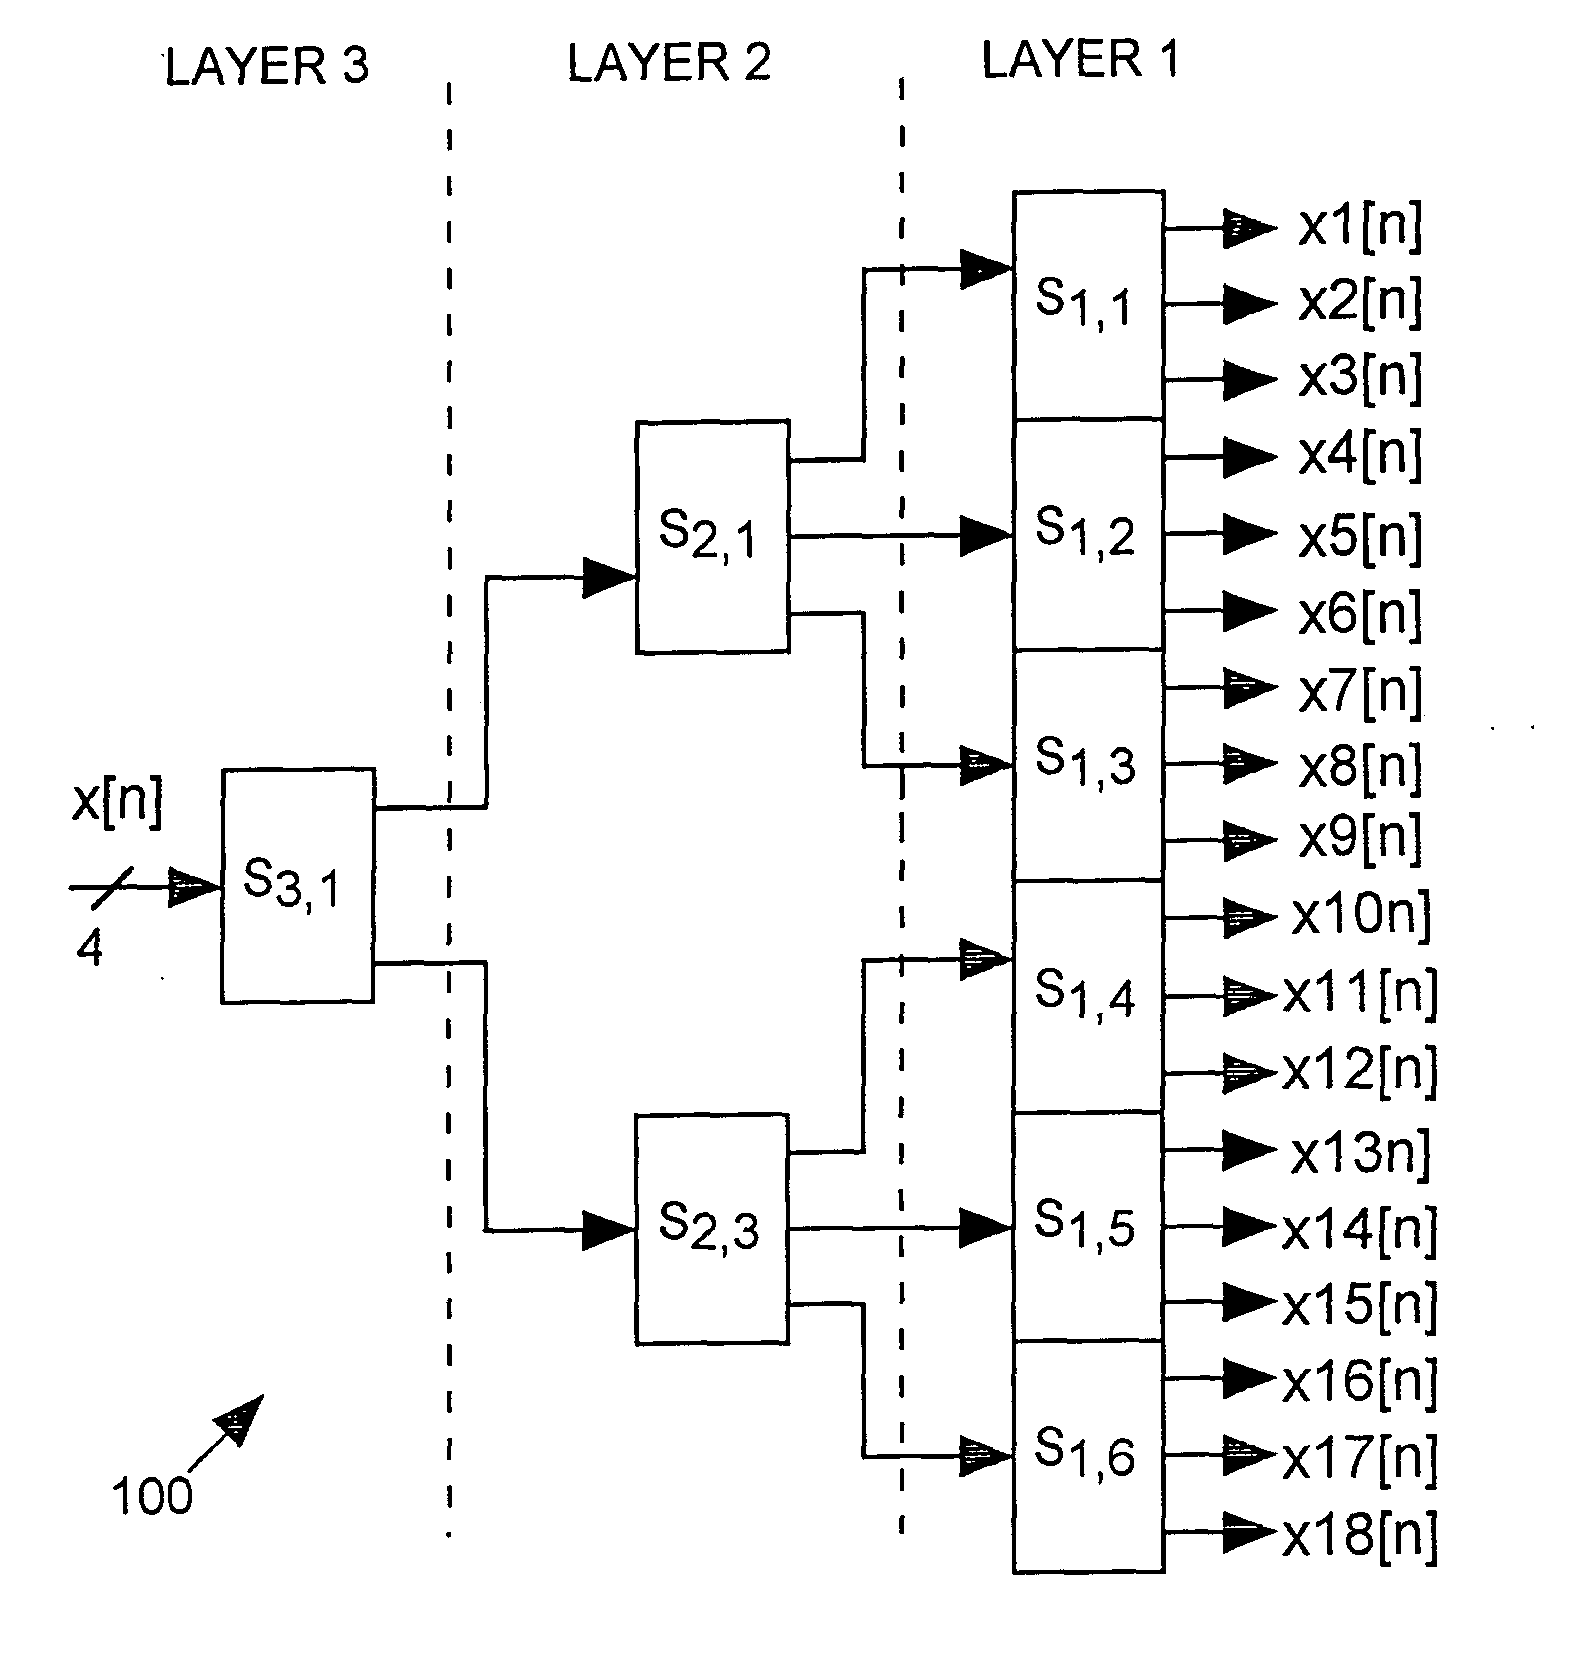 Spectral shaping dynamic encoder for a dac